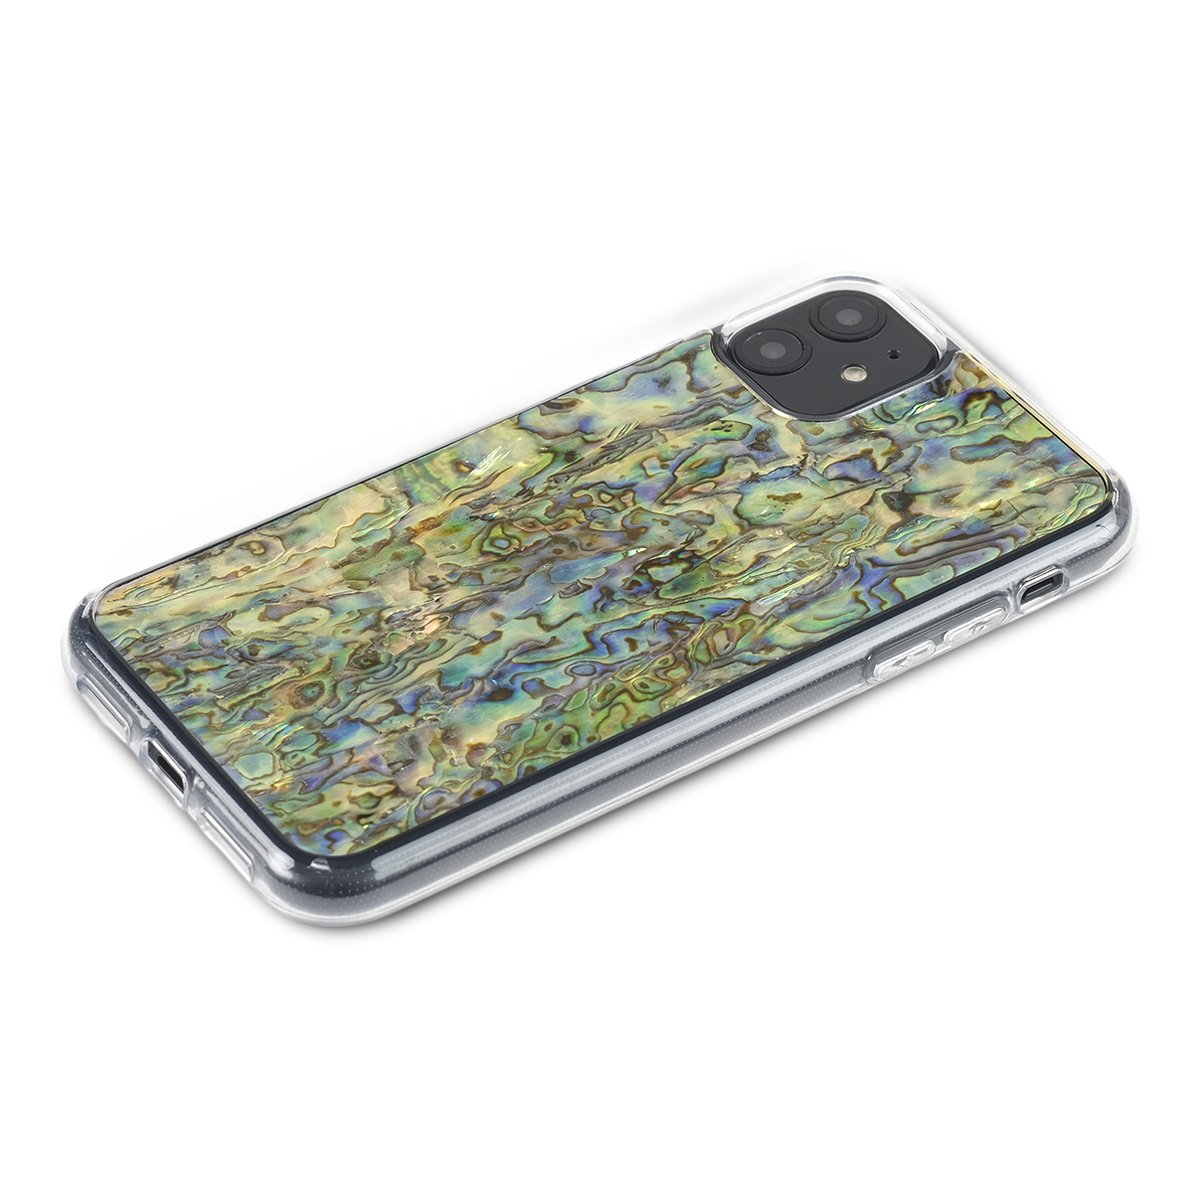 iPhone 11 Pro Max — Shell Explorer Clear Case